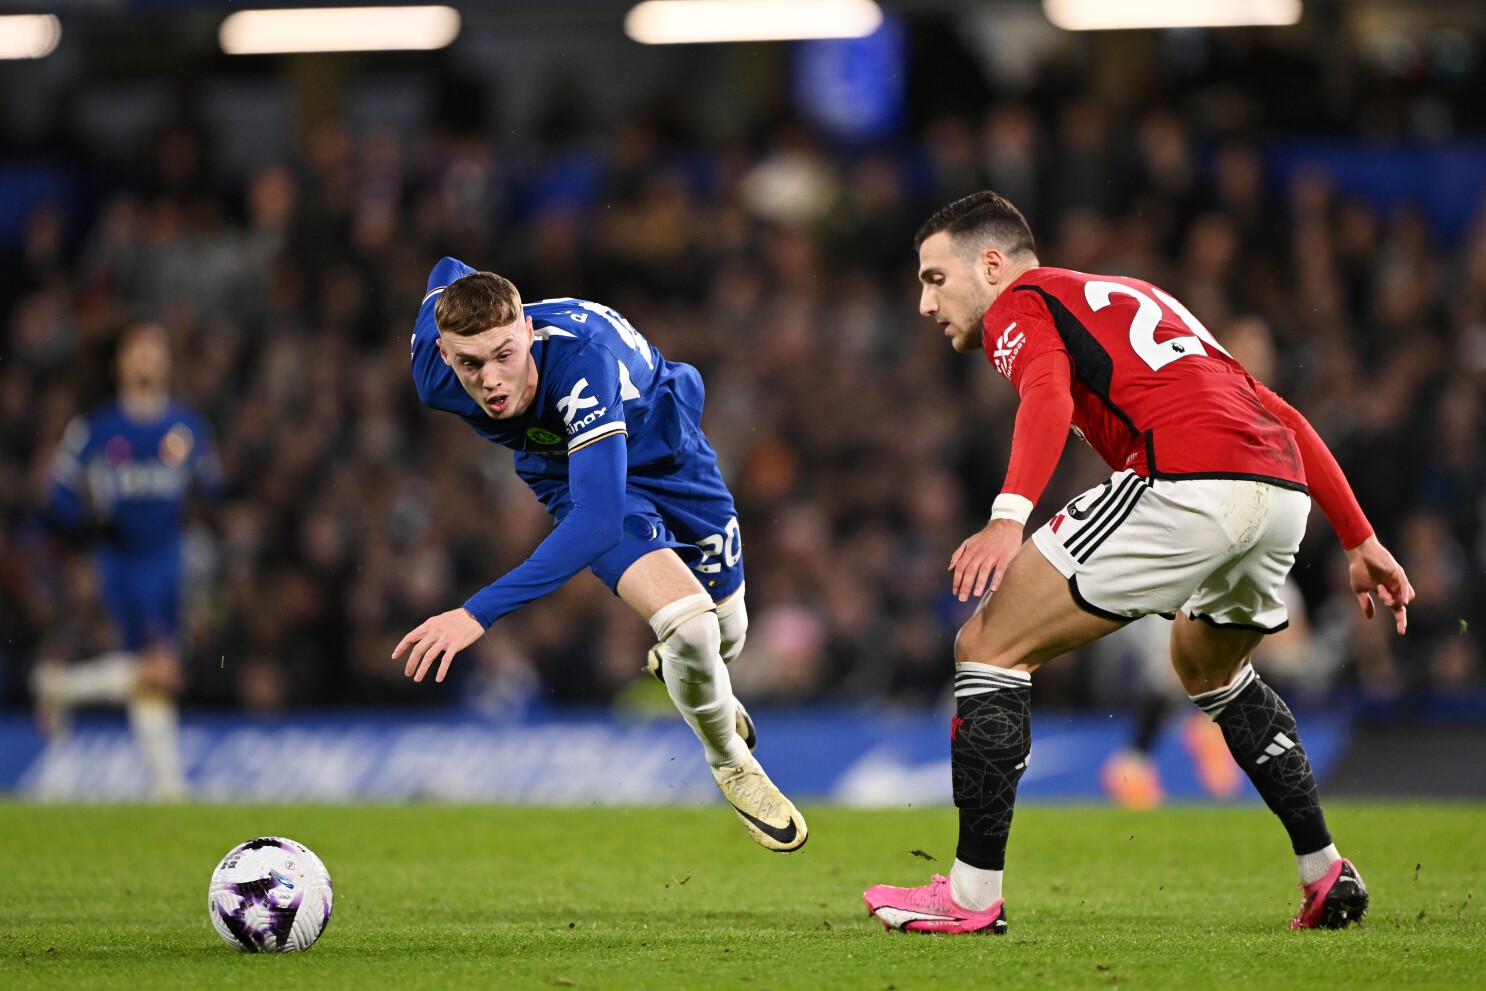 Chelsea 4-3 Manchester United: Palmer hat trick ends thriller - NBC Sports